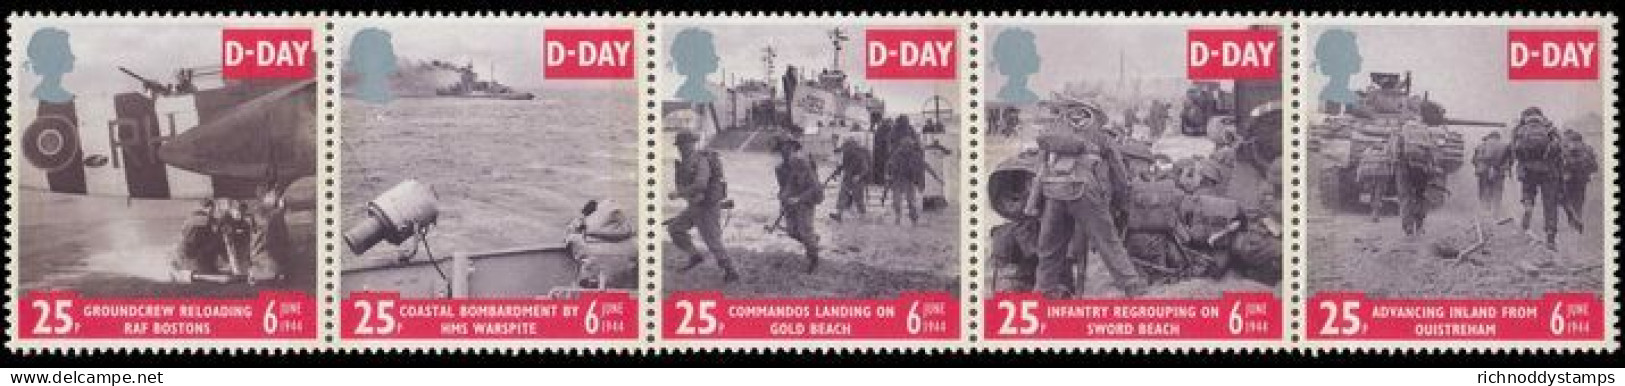 1994 D Day Unmounted Mint. - Unused Stamps